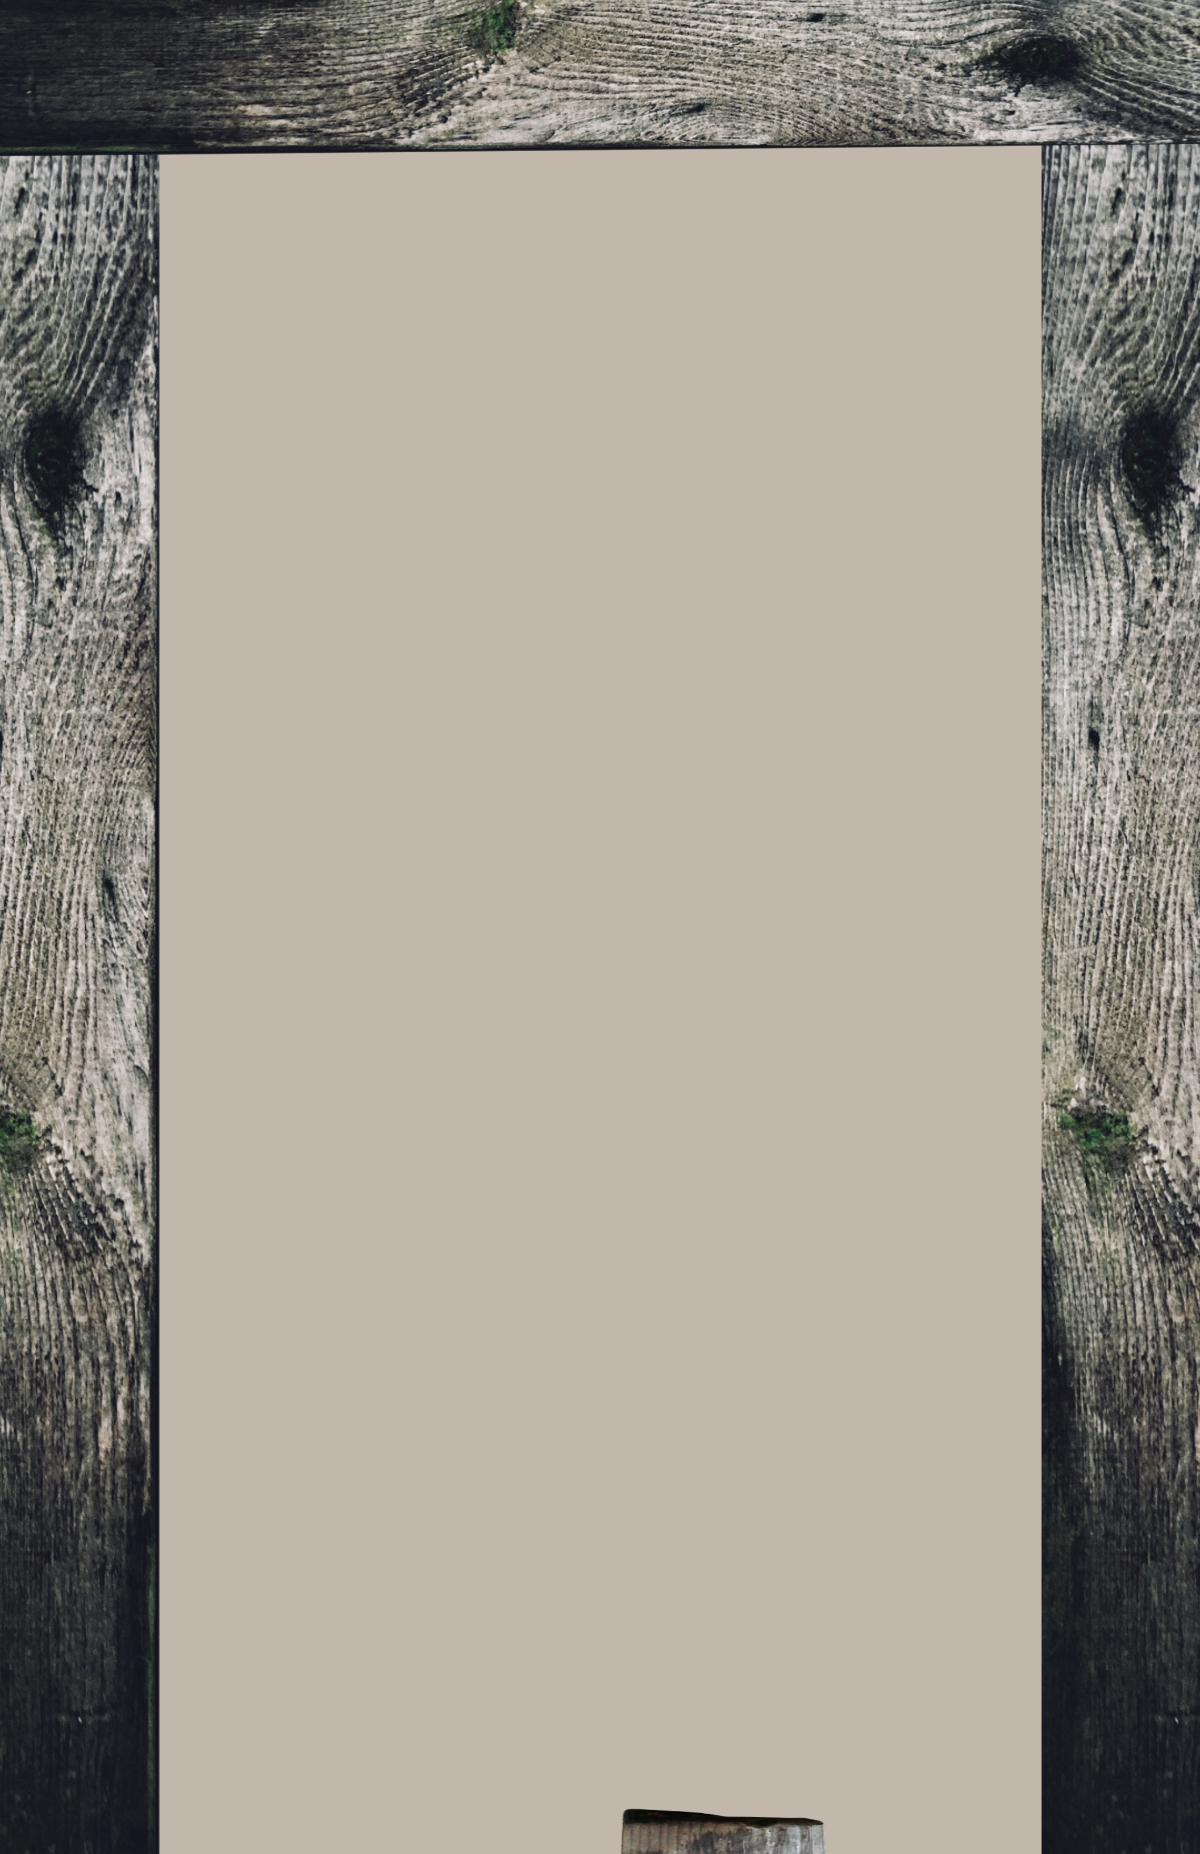 Rustic Poster Frame Template